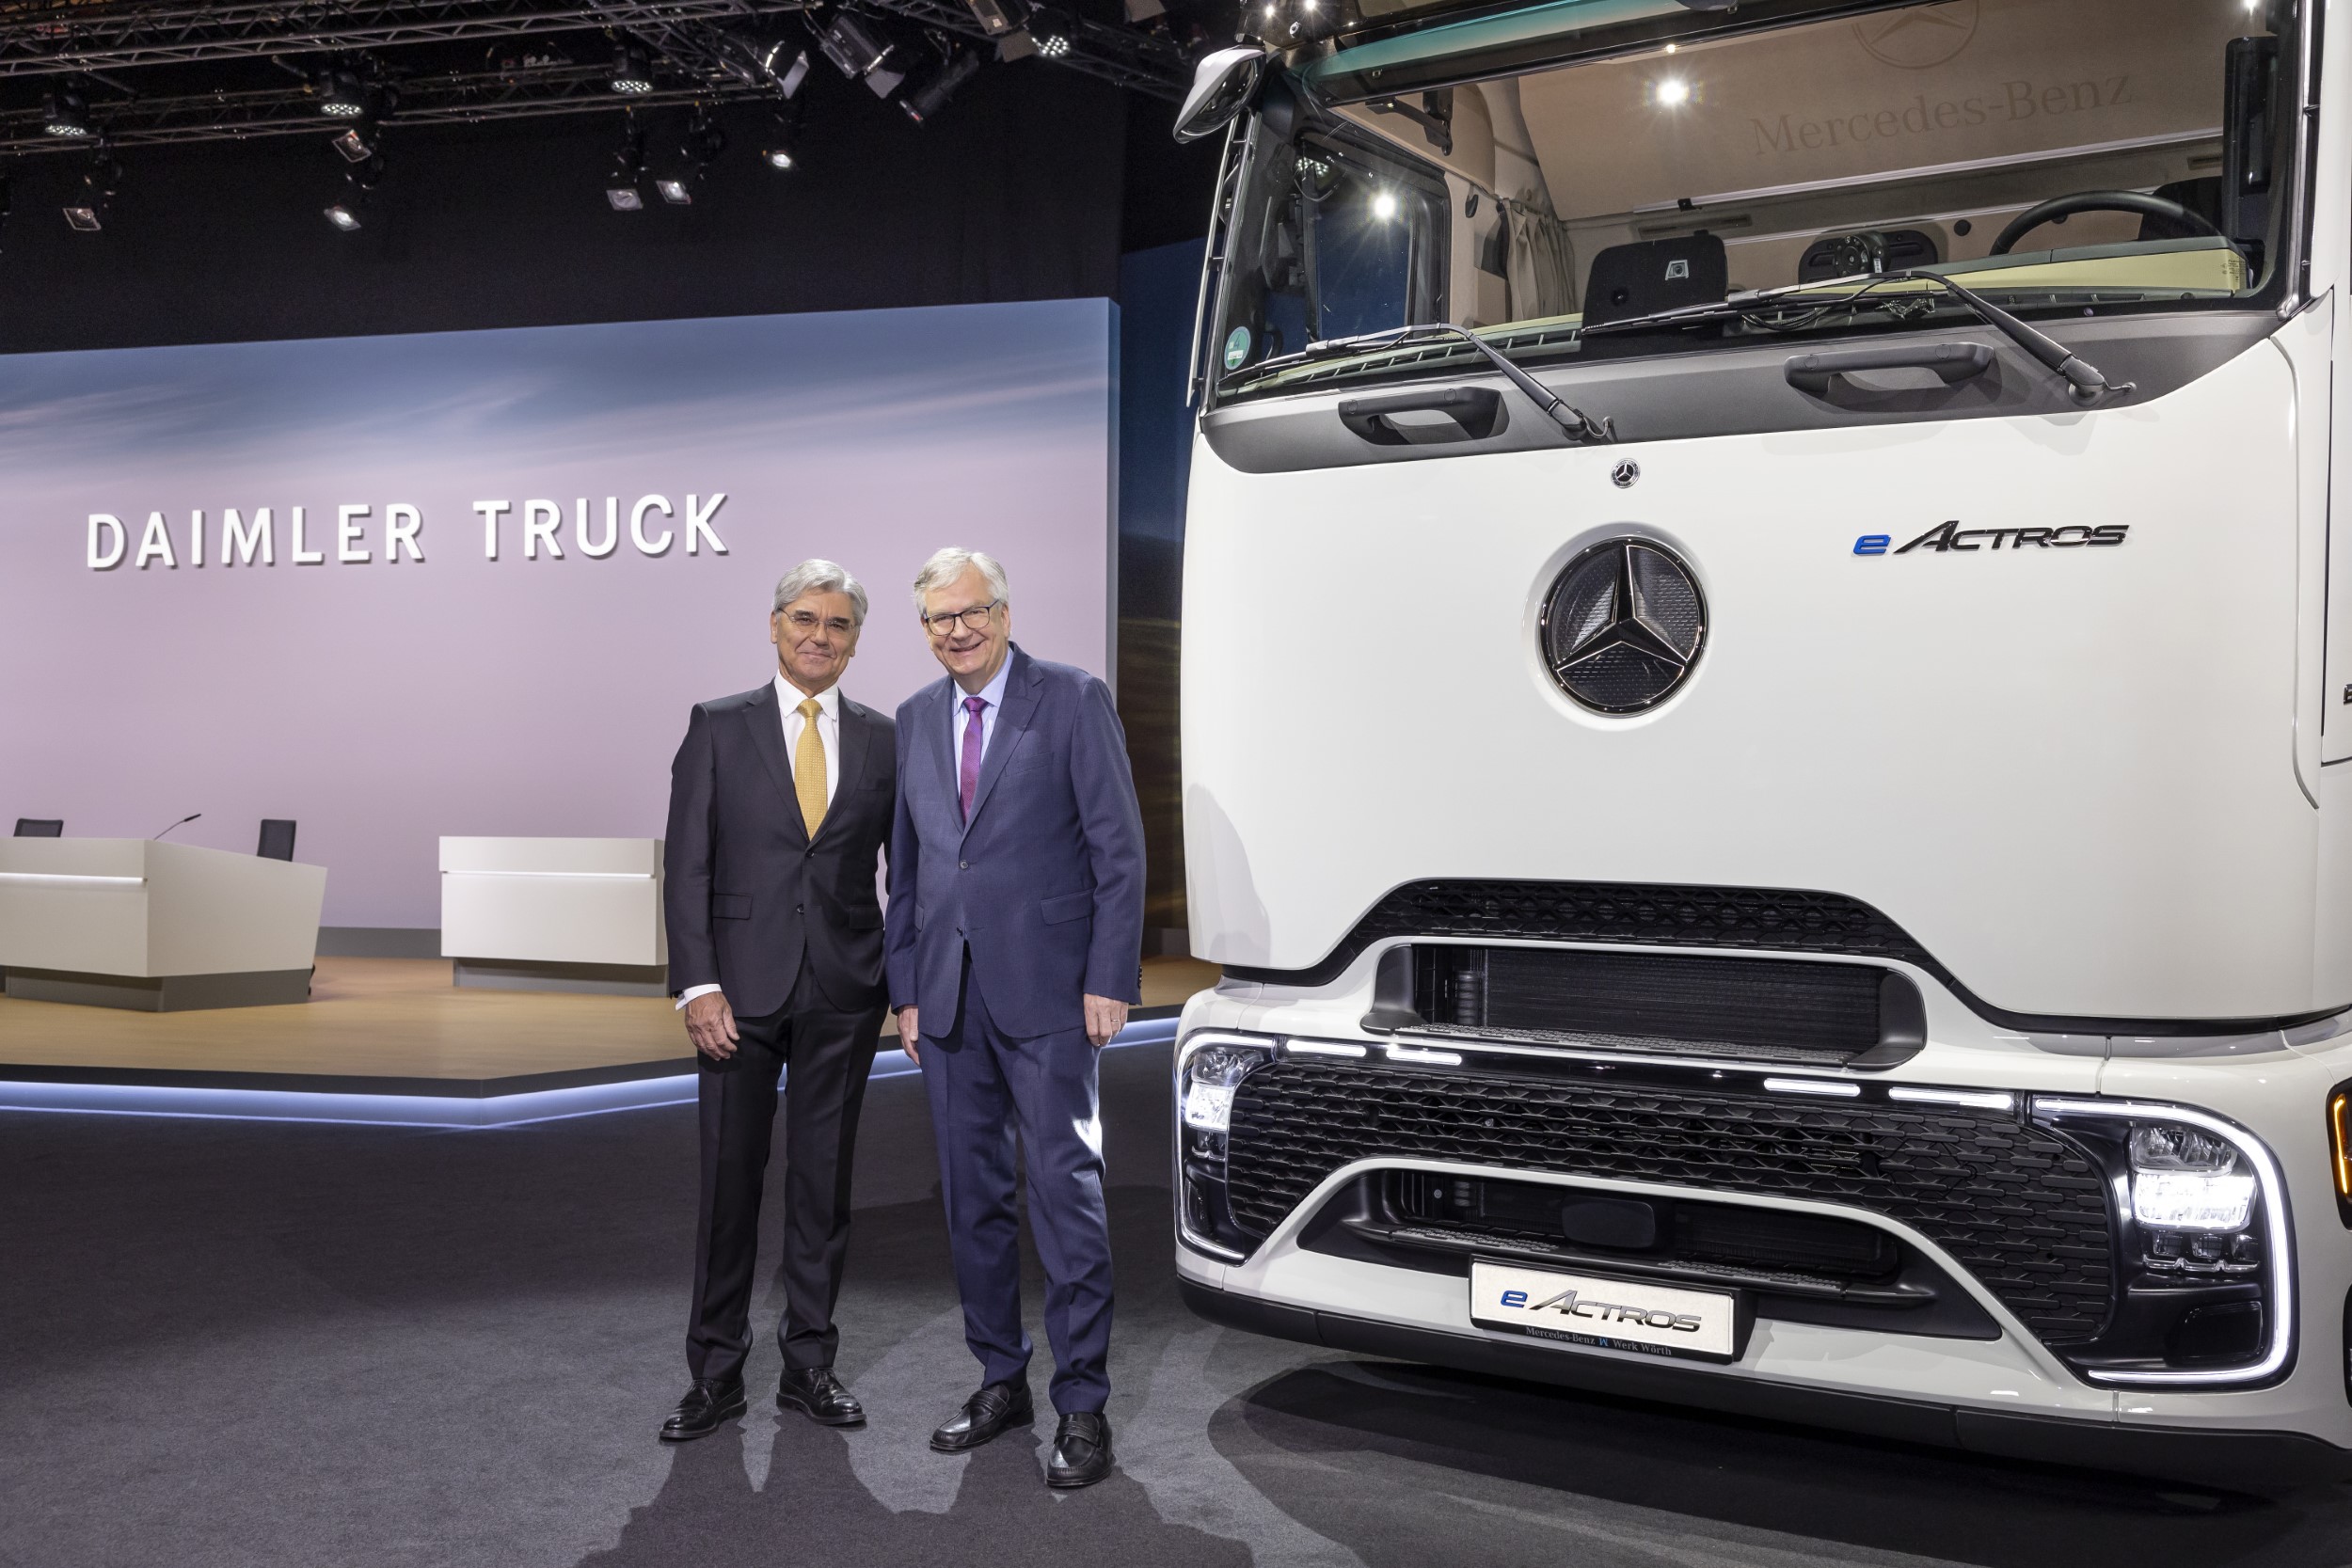 Daimler Truck Holding AG's Annual General Meeting (from left to right): Joe Kaeser and Martin Daum